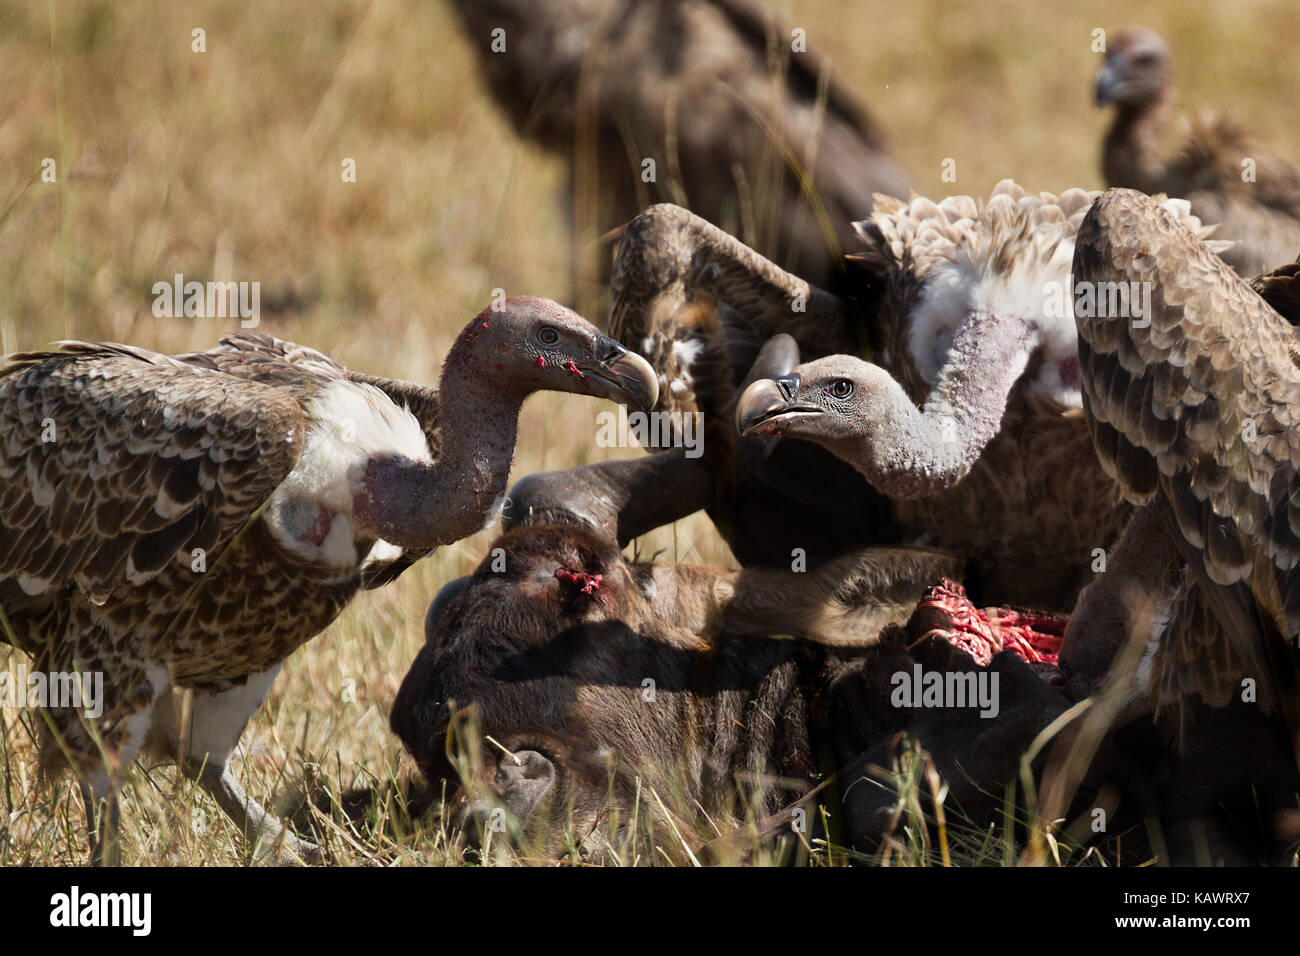 Vultures feasting and eating on wildebeest carcass in the Masai Mara, Kenya Stock Photo